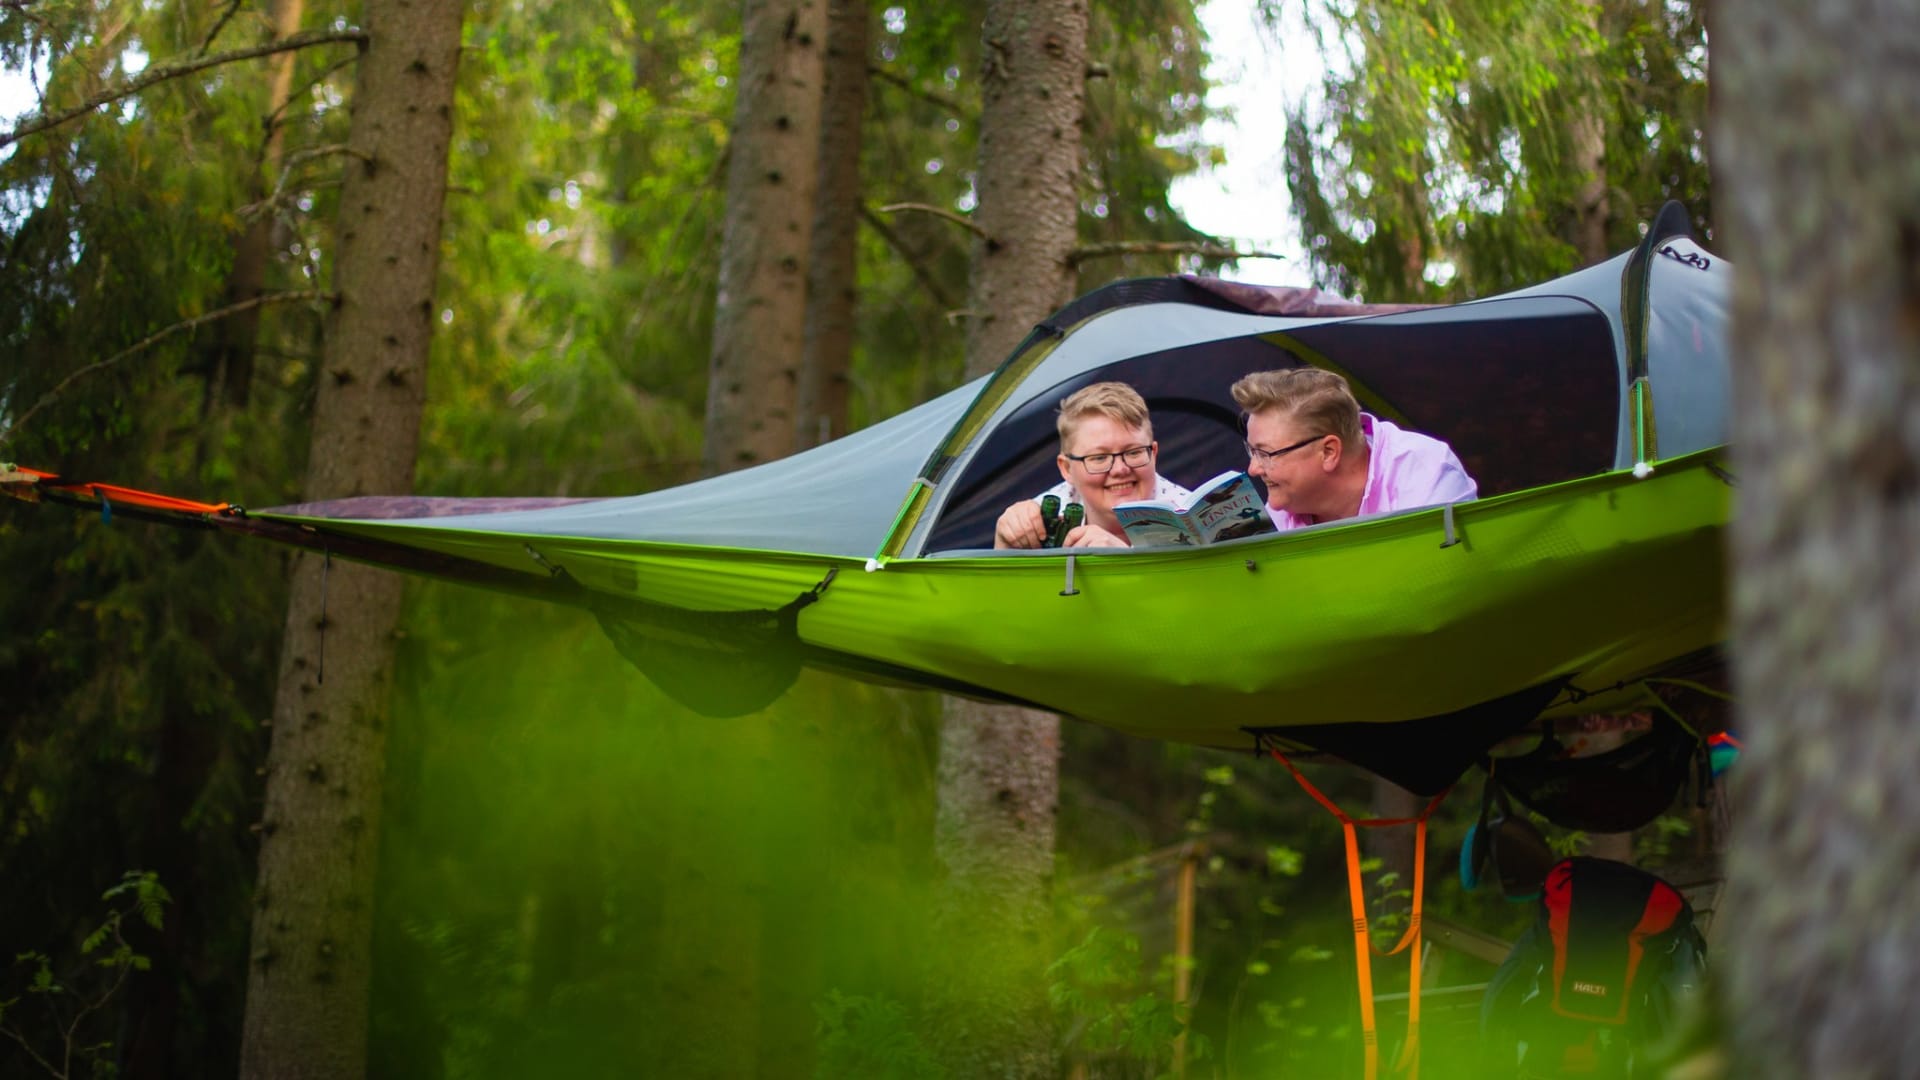 It is wonderful to relax in the Tentsile tree tent glamping site of Kommee Kurki.